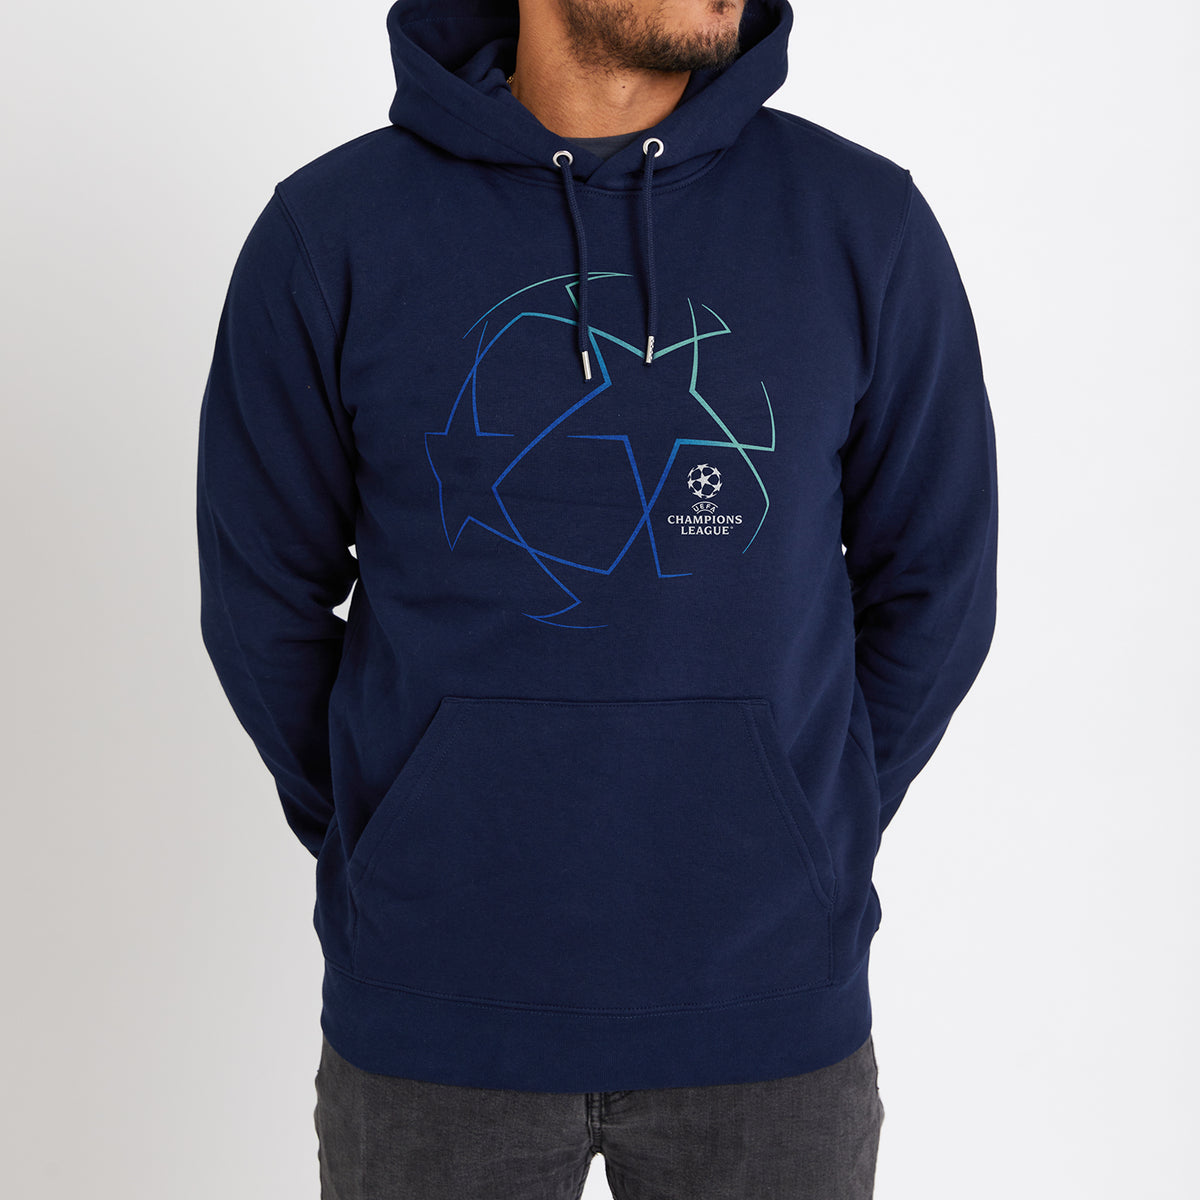 UEFA Champions League - Starball Navy Hoodie UEFA Club Competitions Online Store